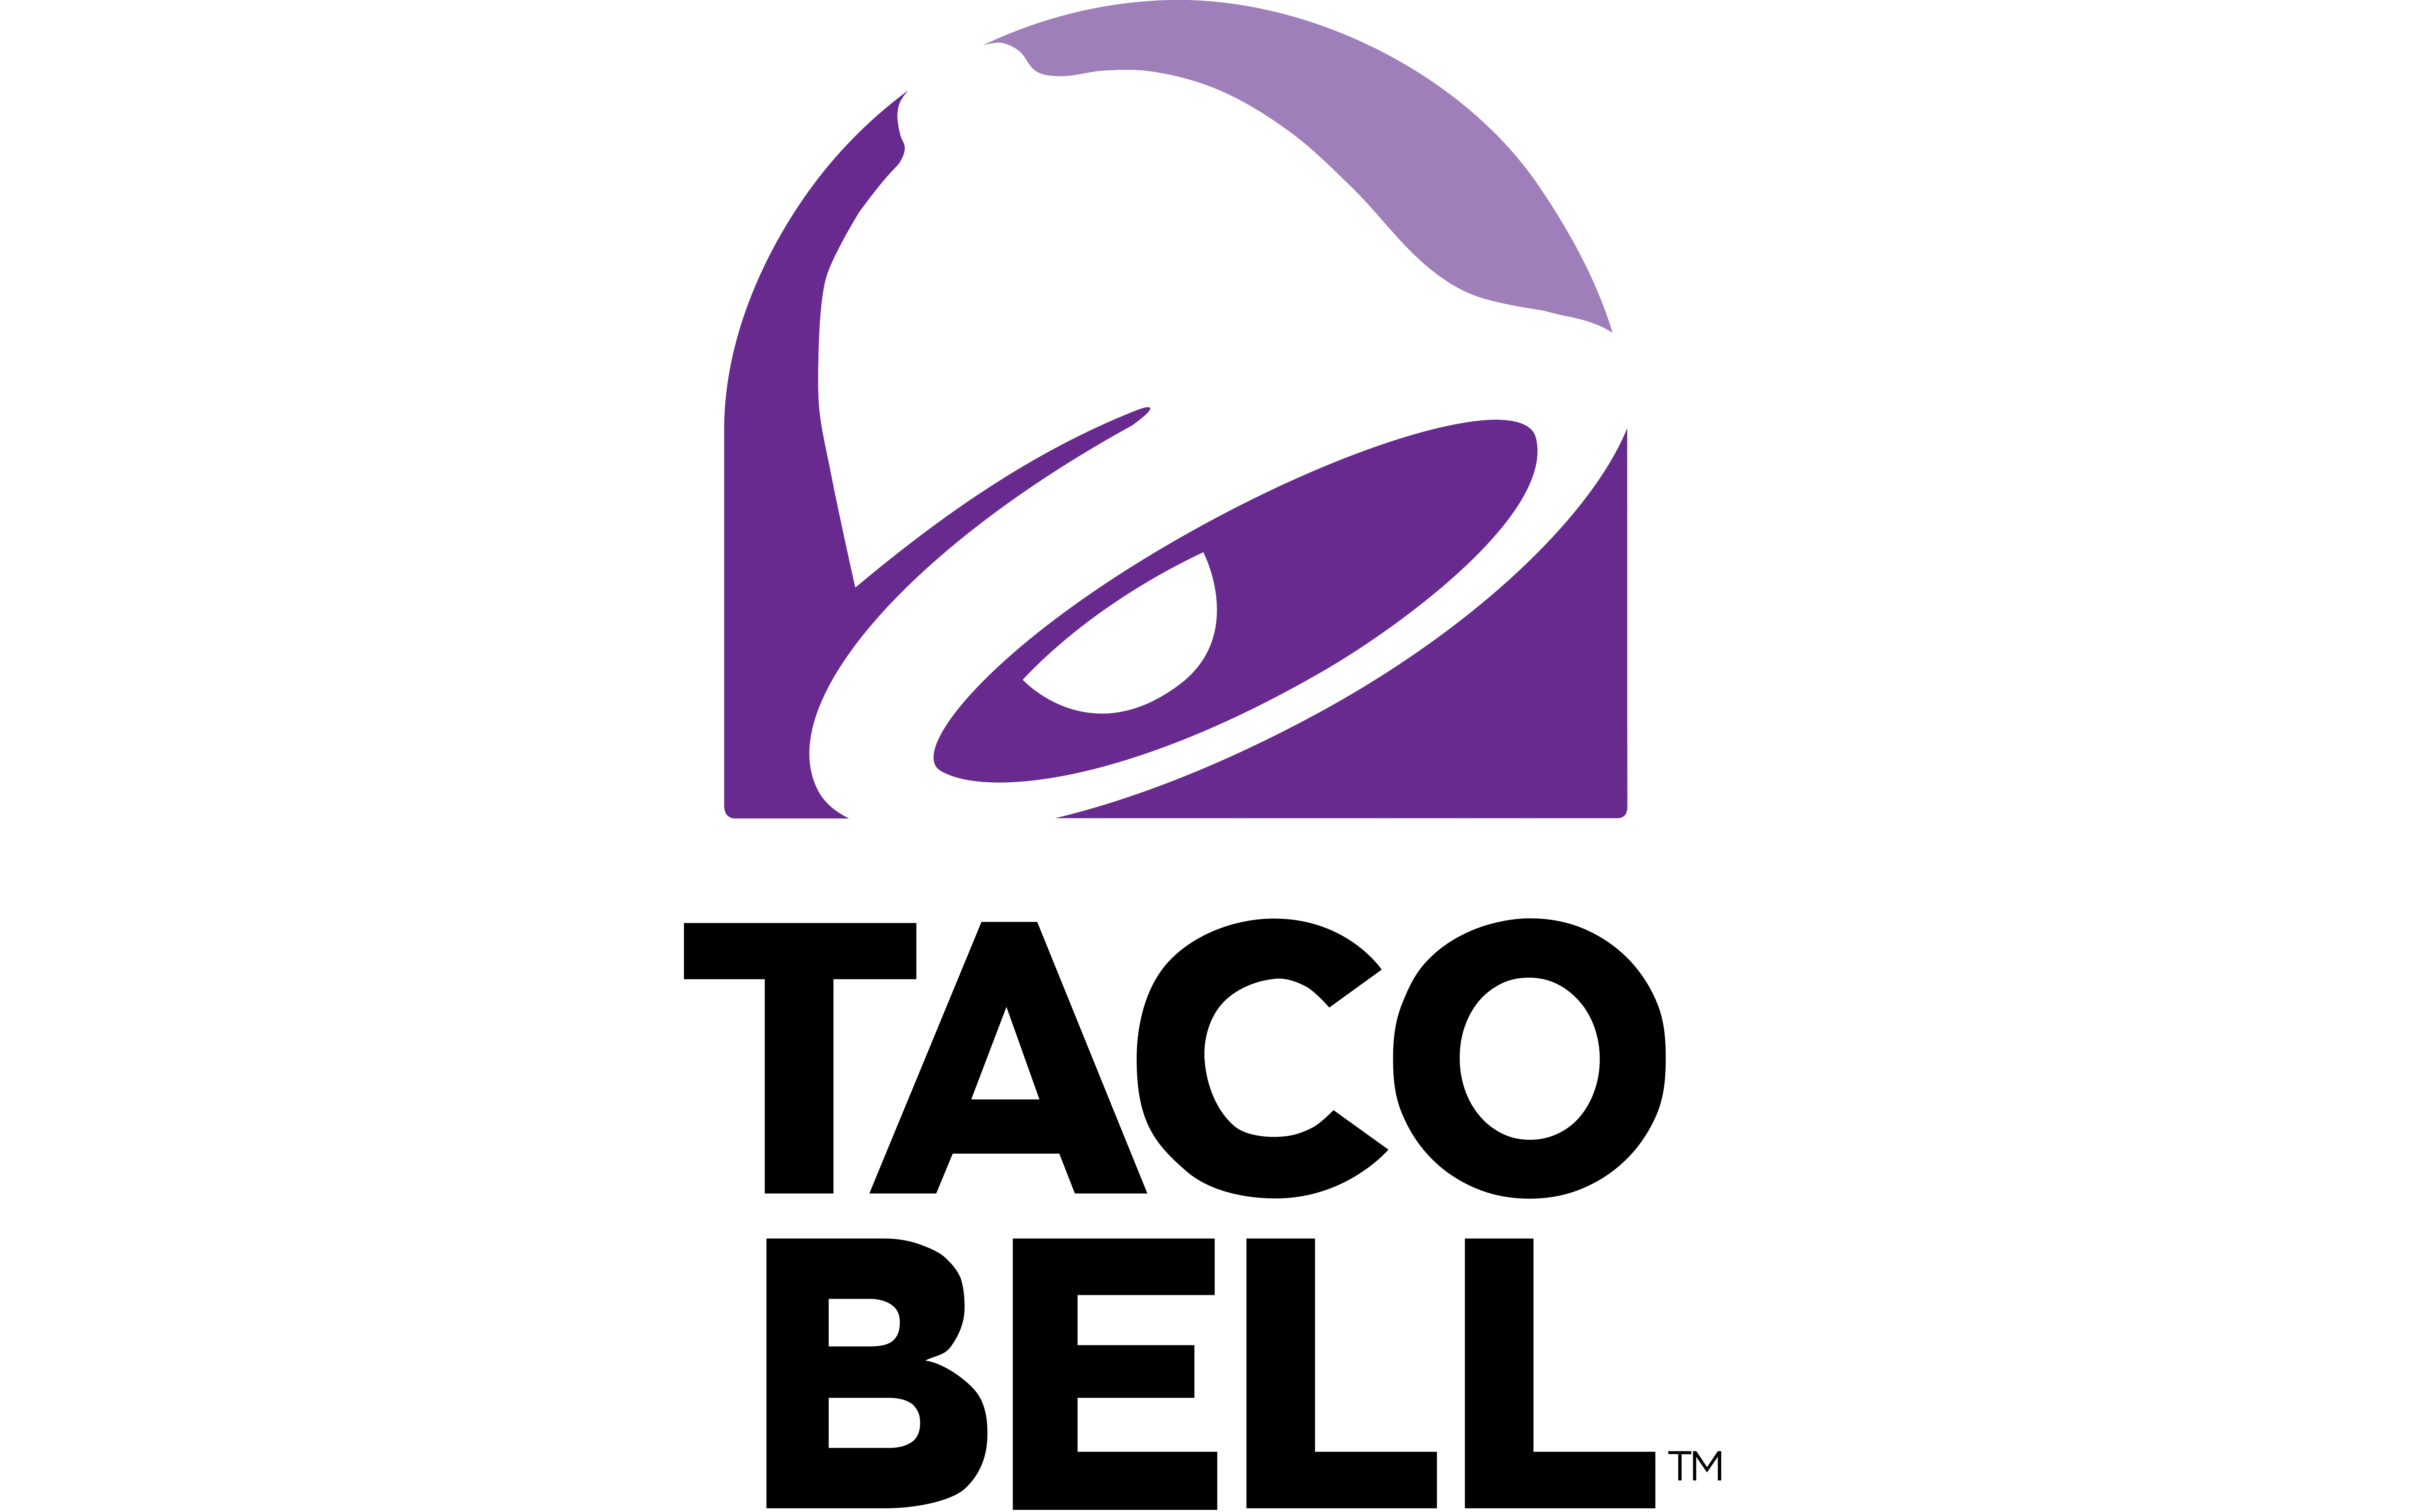 Taco Bell Logo, Taco Bell Symbol, Meaning, History and Evolution